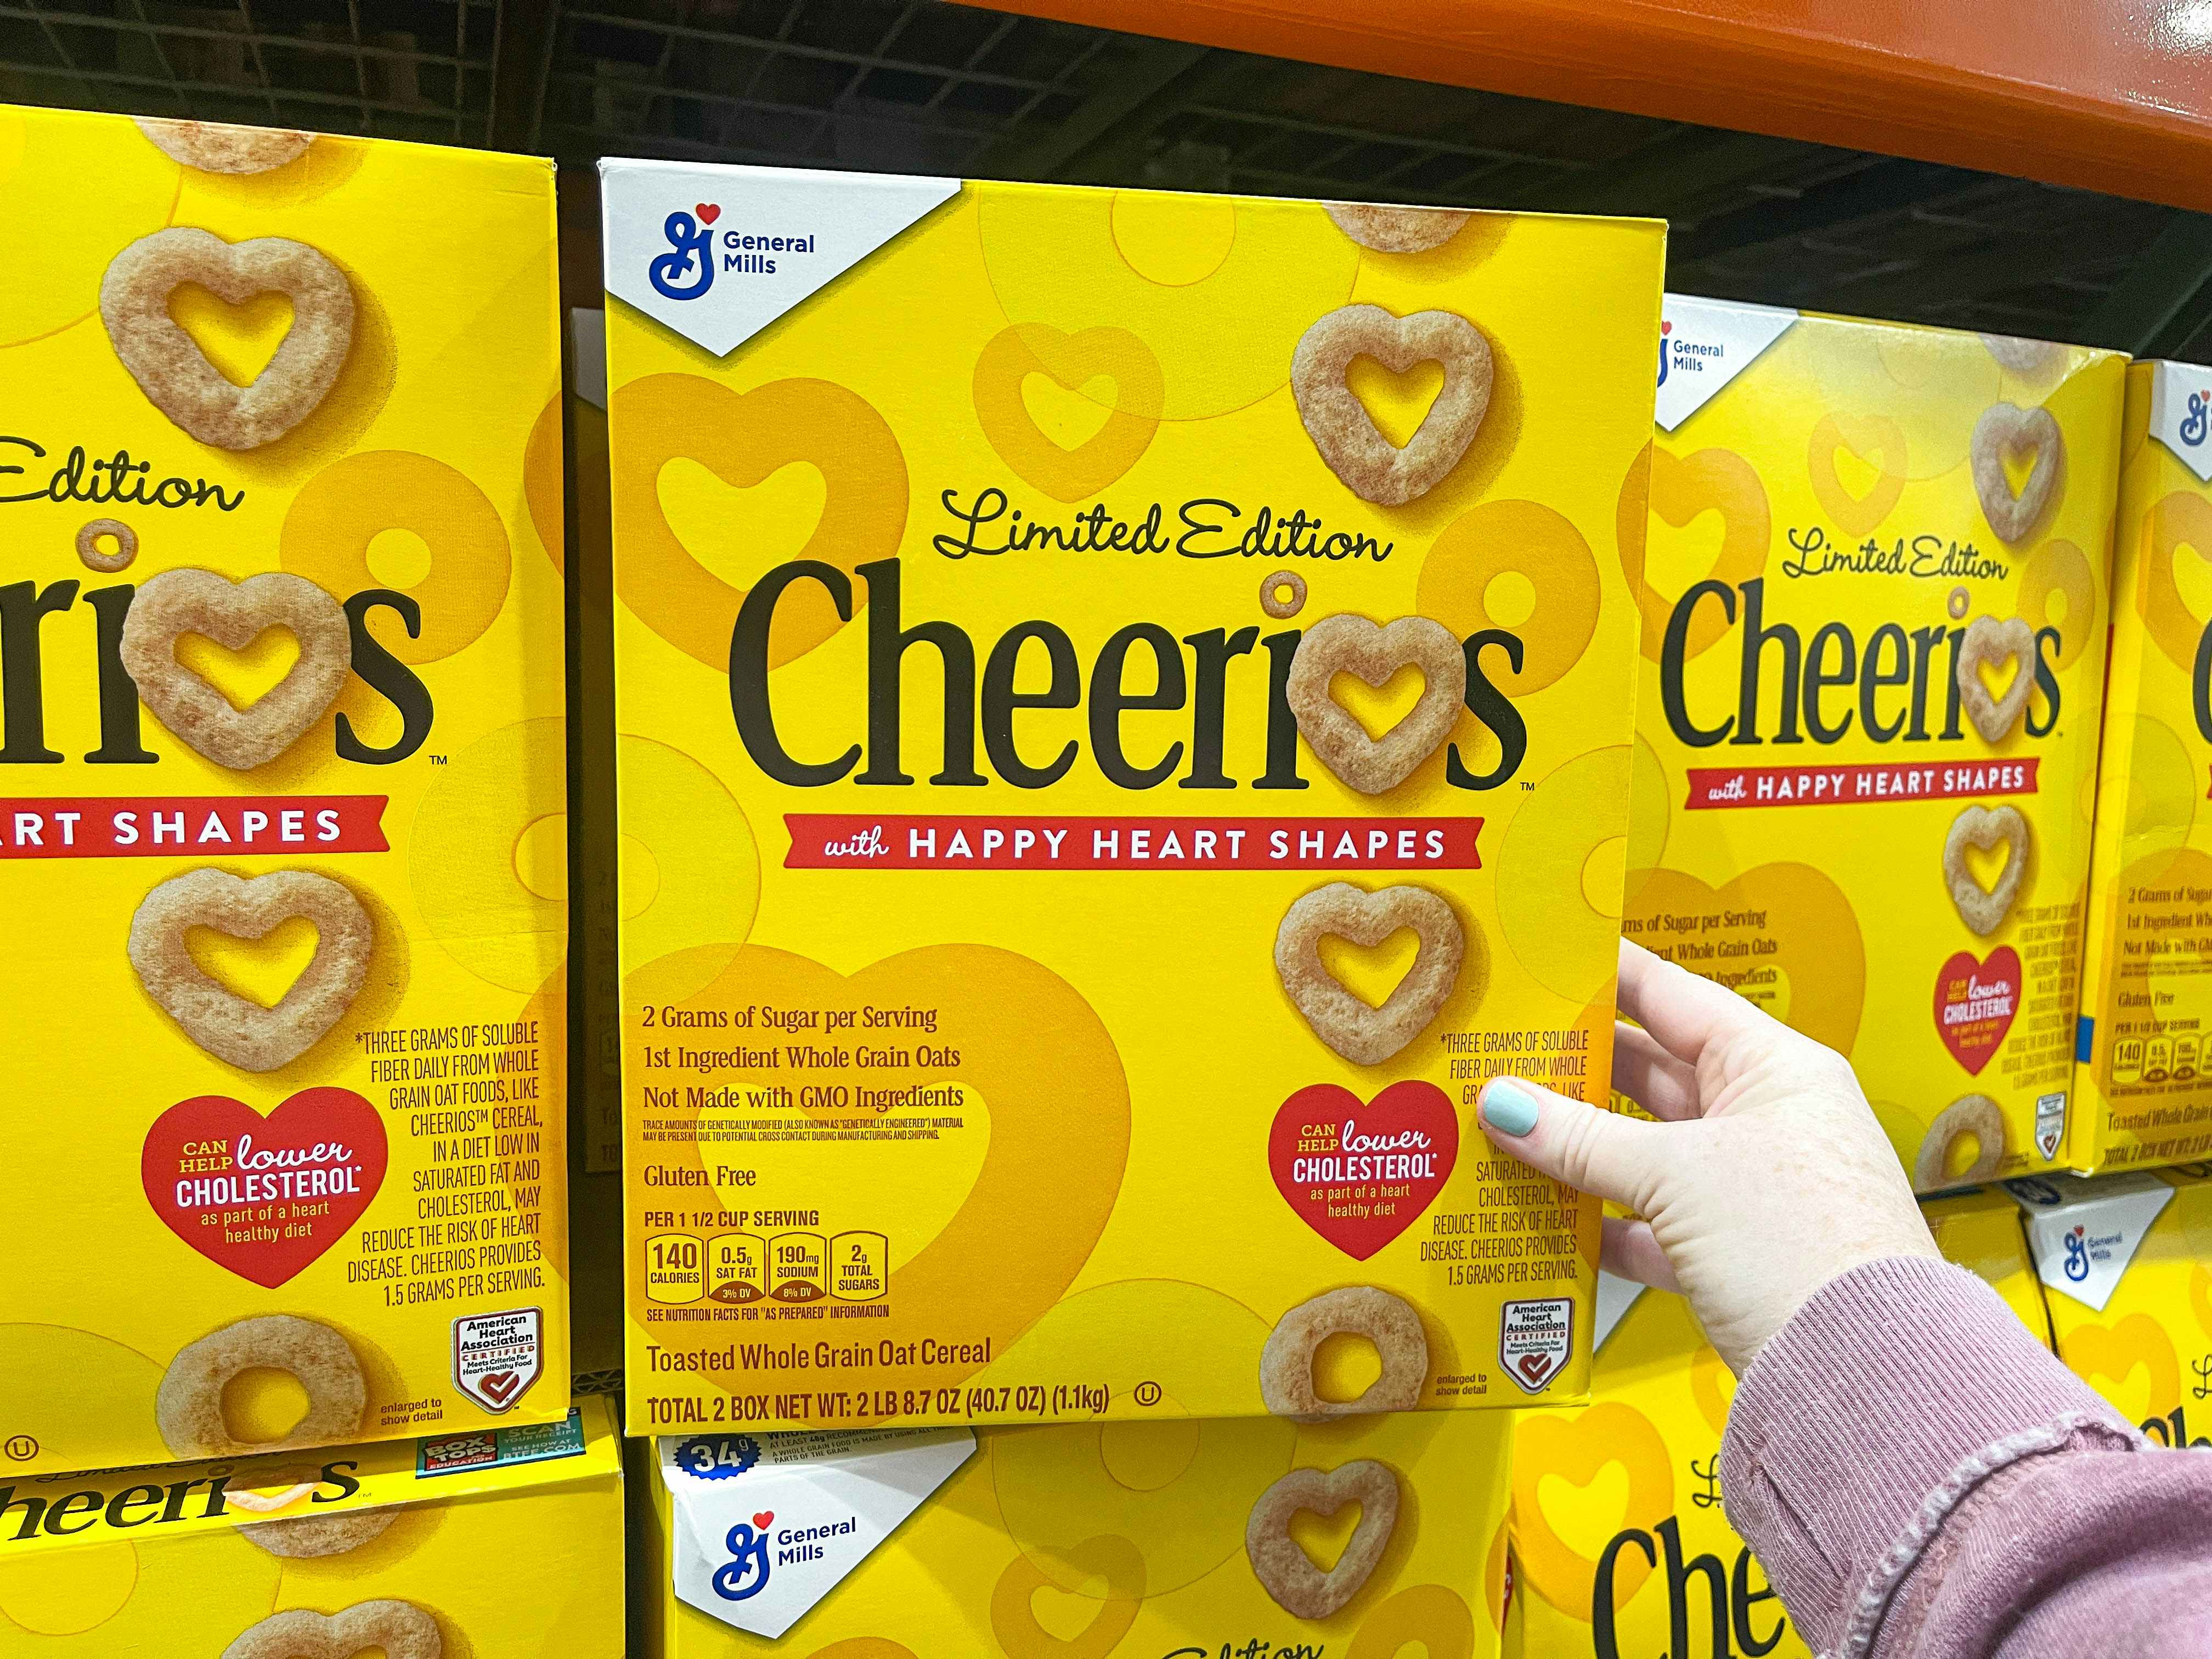 a box of cherrios being held in store 